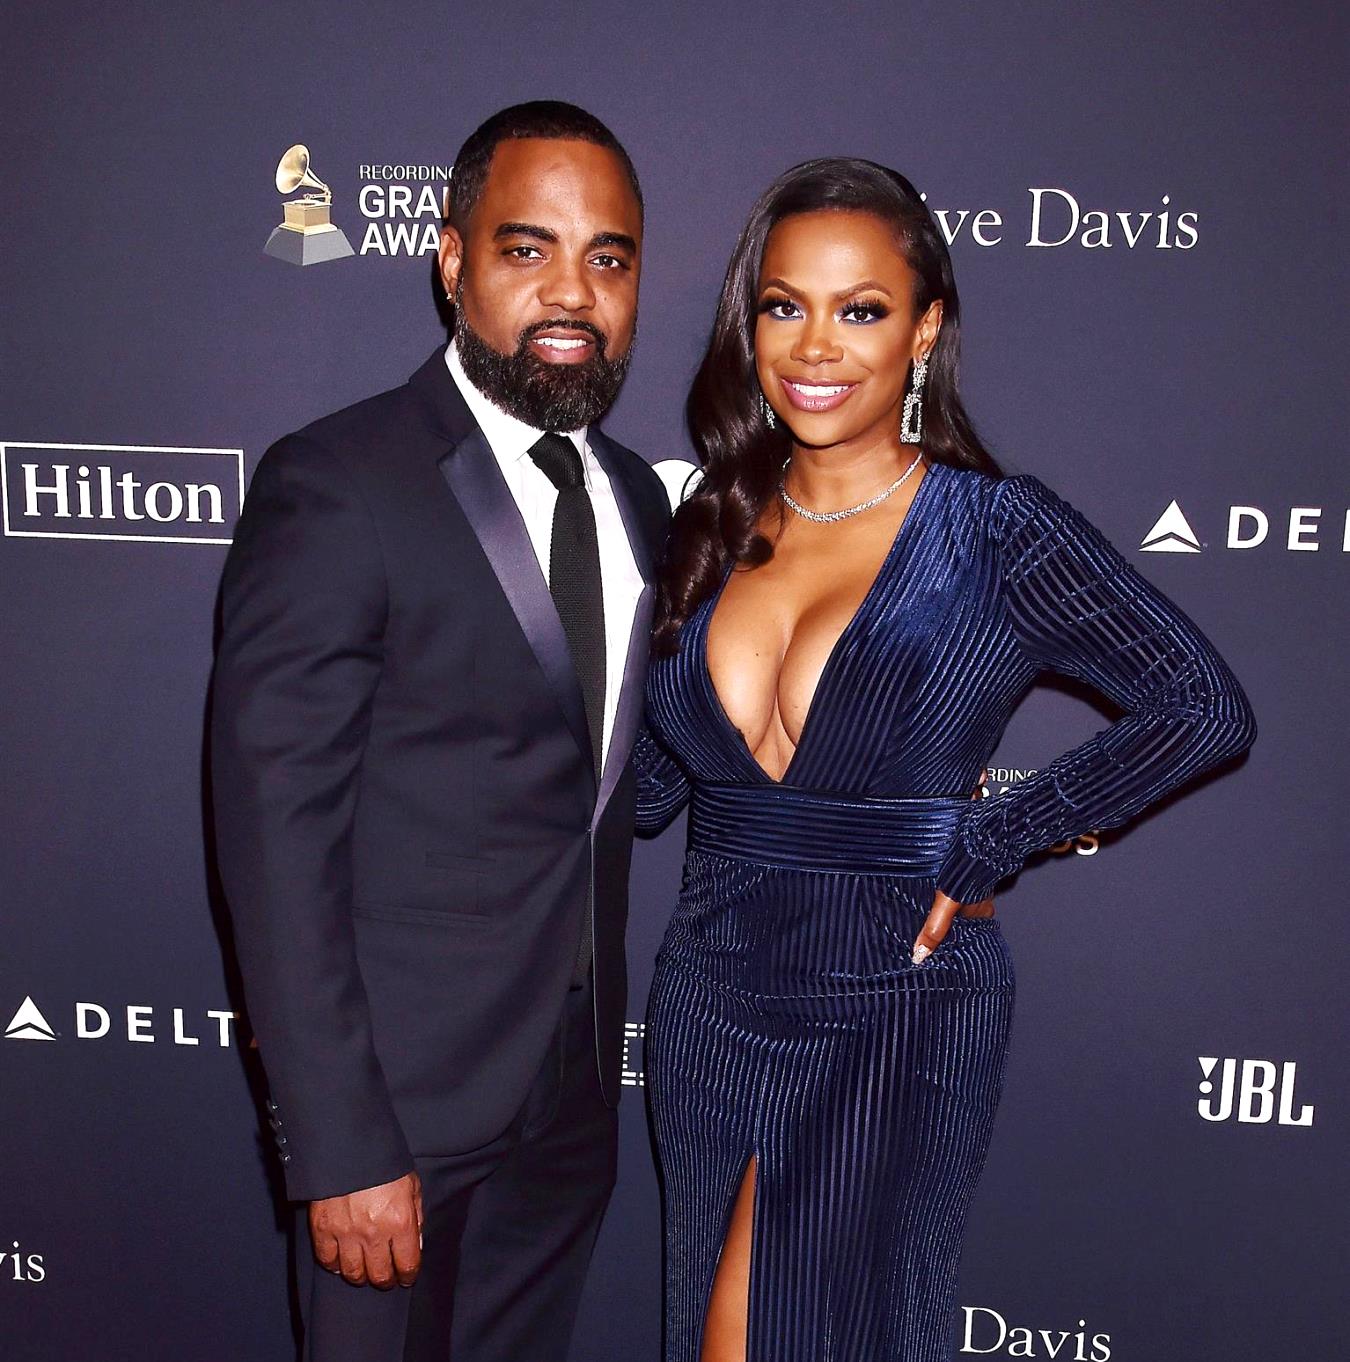 REPORT: RHOA's Kandi Burruss and Todd Tucker Get a New Spinoff! To Begin Filming Vanderpump Rules-Style Show Called Old Lady Gang